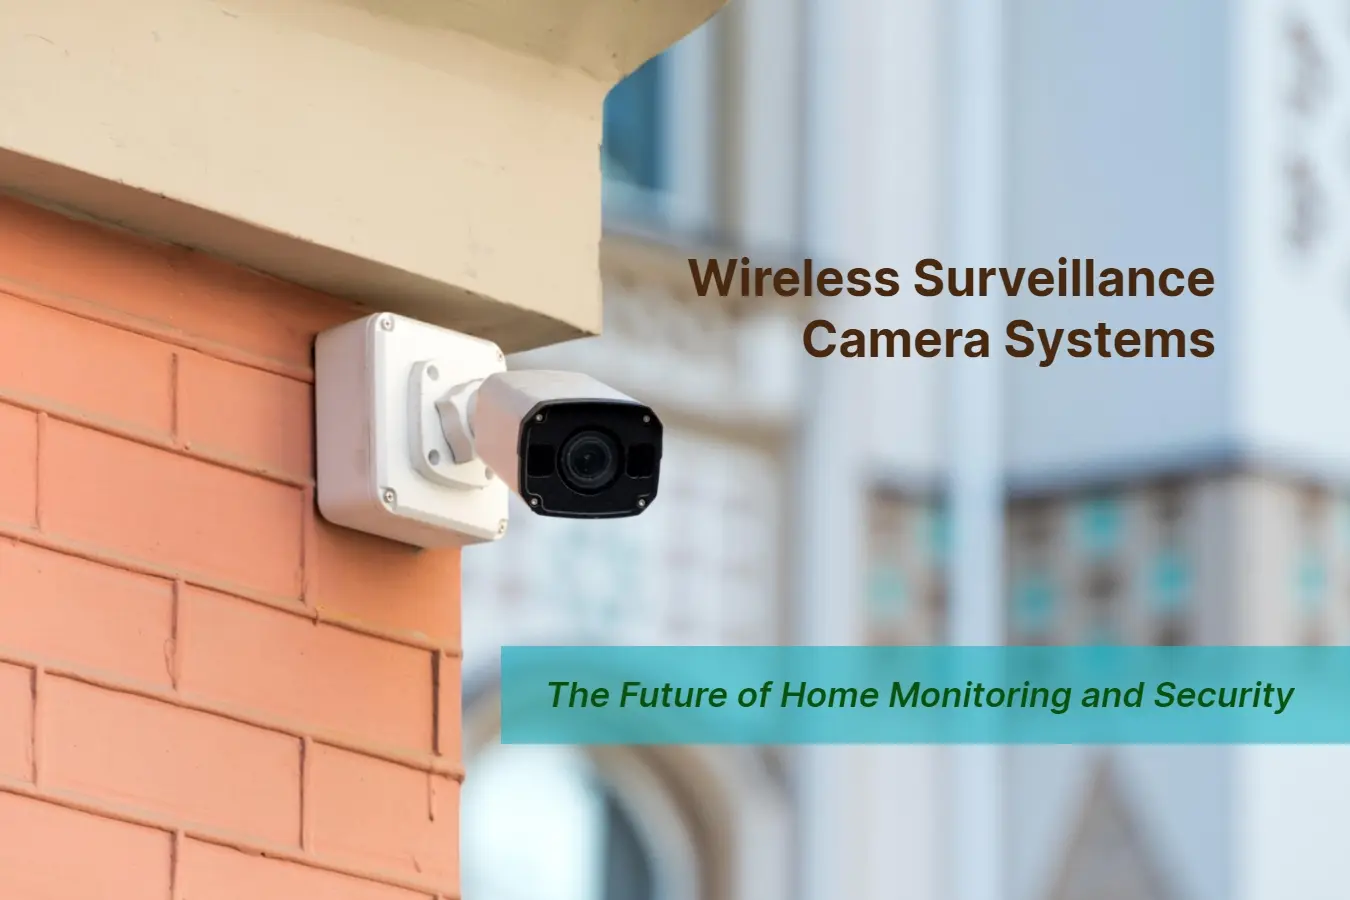 Wireless Surveillance Camera Systems The Future of Home Monitoring and Security